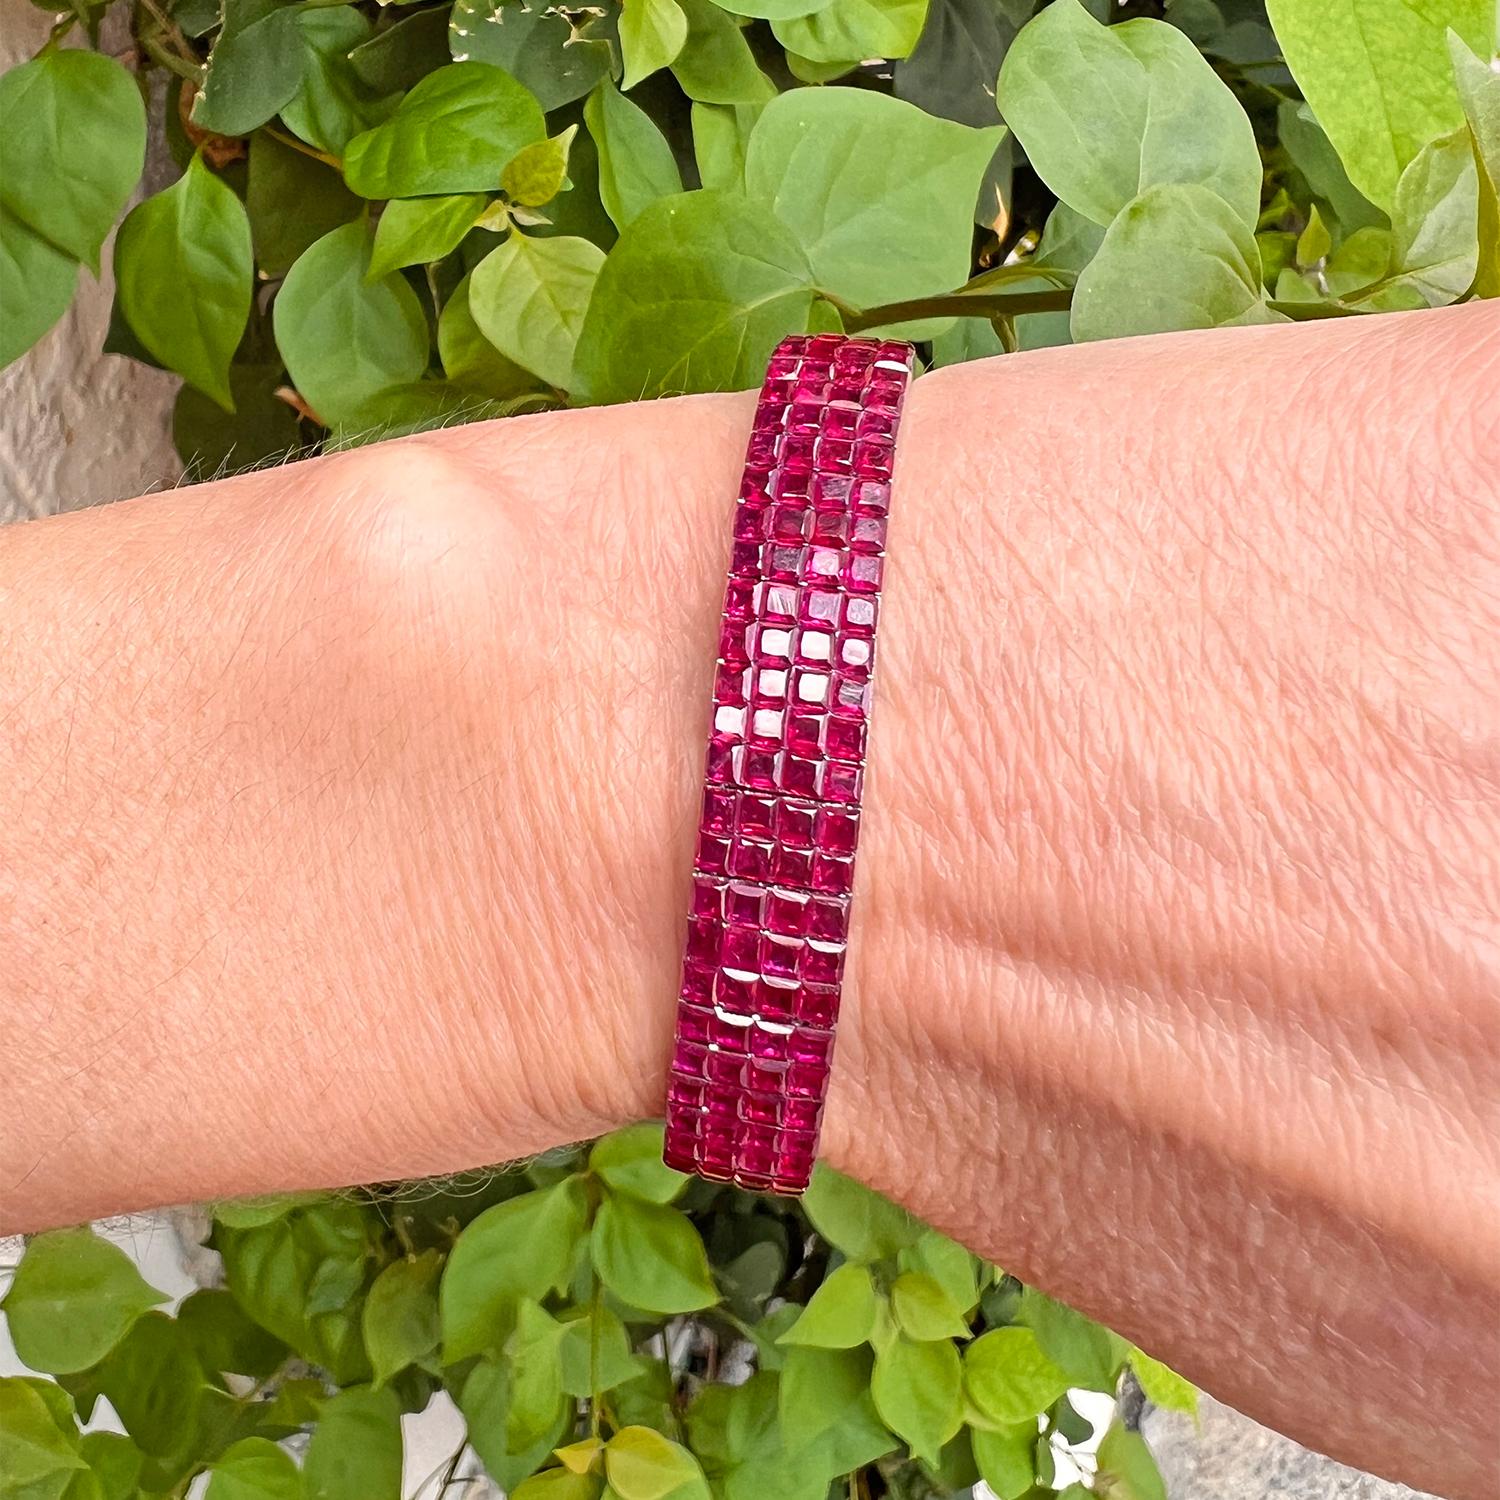 Elegant modern line bracelet, showcasing four rows of faceted square-shaped natural rubies invisibly-set in 18k white gold.  272 rubies weighing 47.56 total carats.  Beautifully articulated design of the bracelet allows the gem rubies to glisten